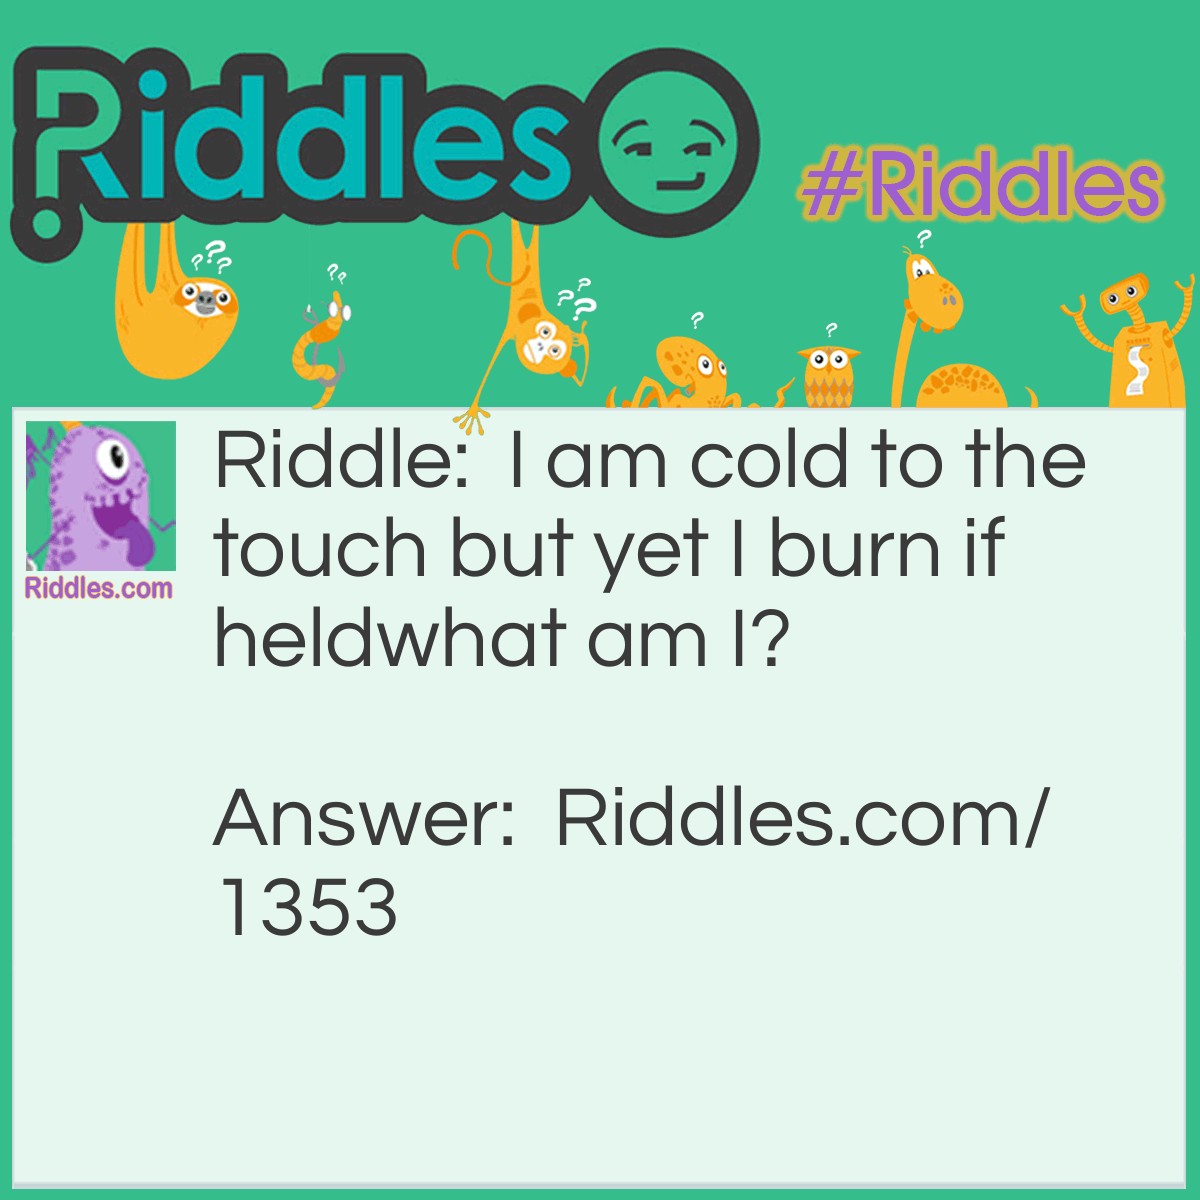 Riddle: I am cold to the touch but yet I burn if held
what am I? Answer: Dry Ice